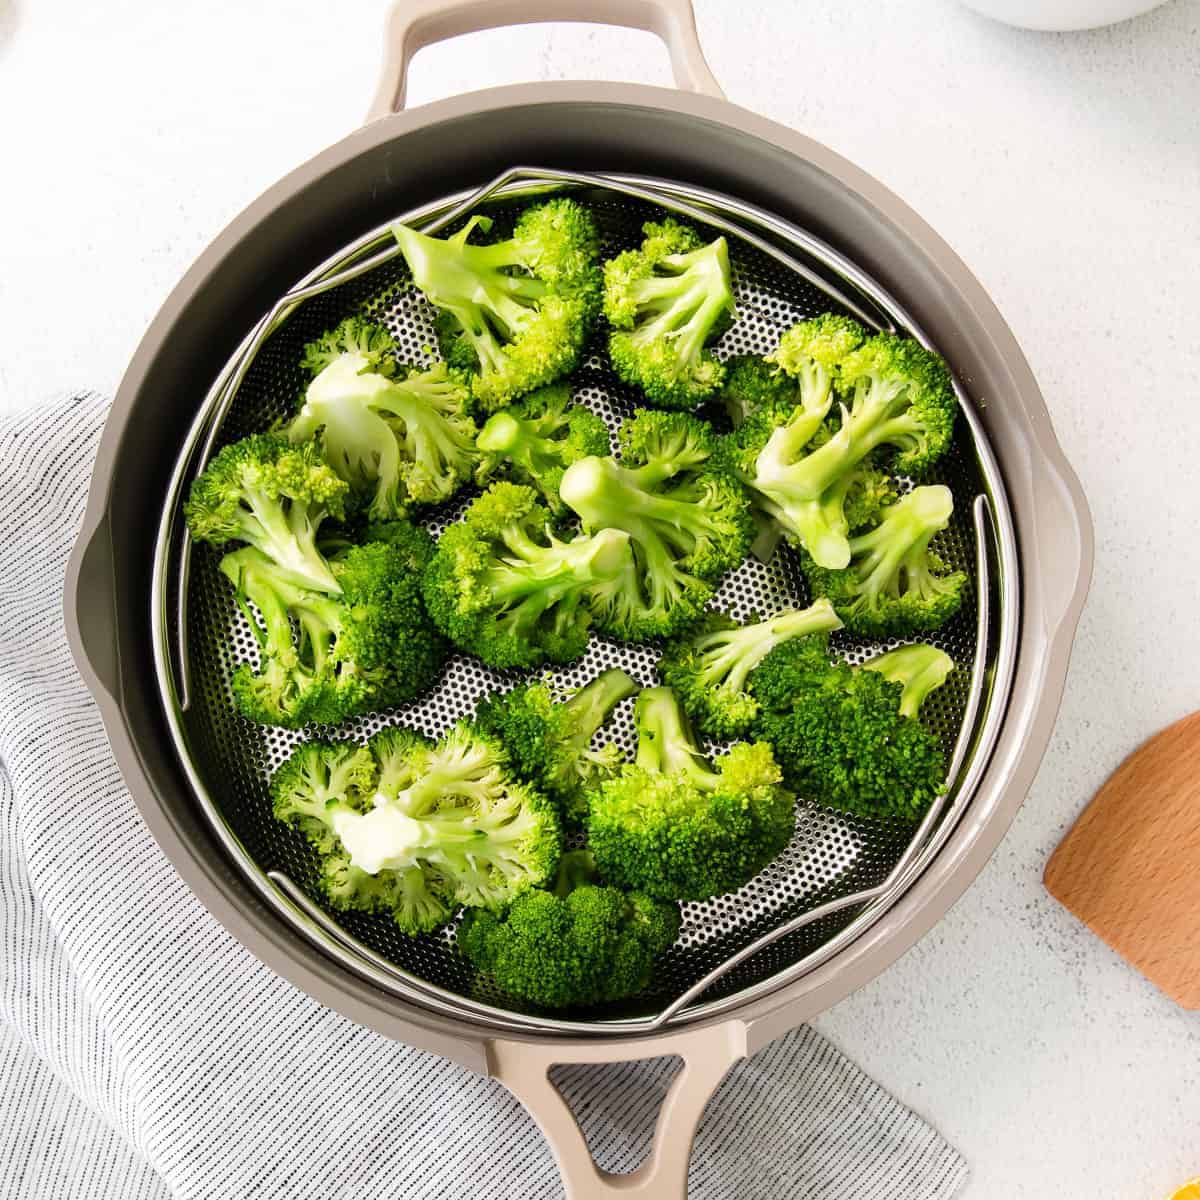 https://fitfoodiefinds.com/wp-content/uploads/2021/05/How-to-Steam-Broccoli-12sq.jpg